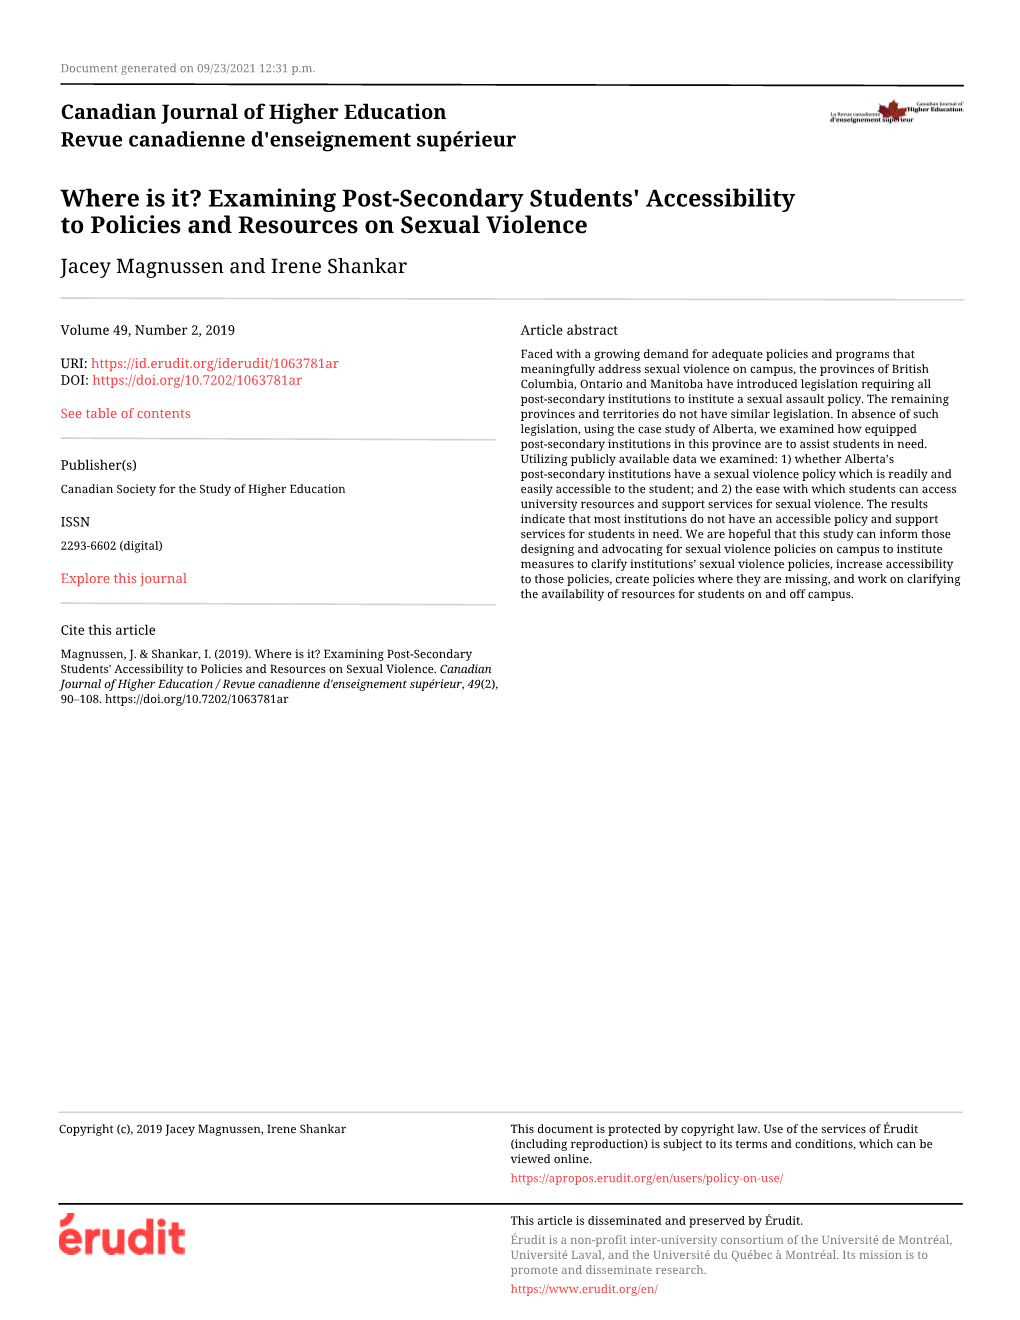 Examining Post-Secondary Students' Accessibility to Policies and Resources on Sexual Violence Jacey Magnussen and Irene Shankar